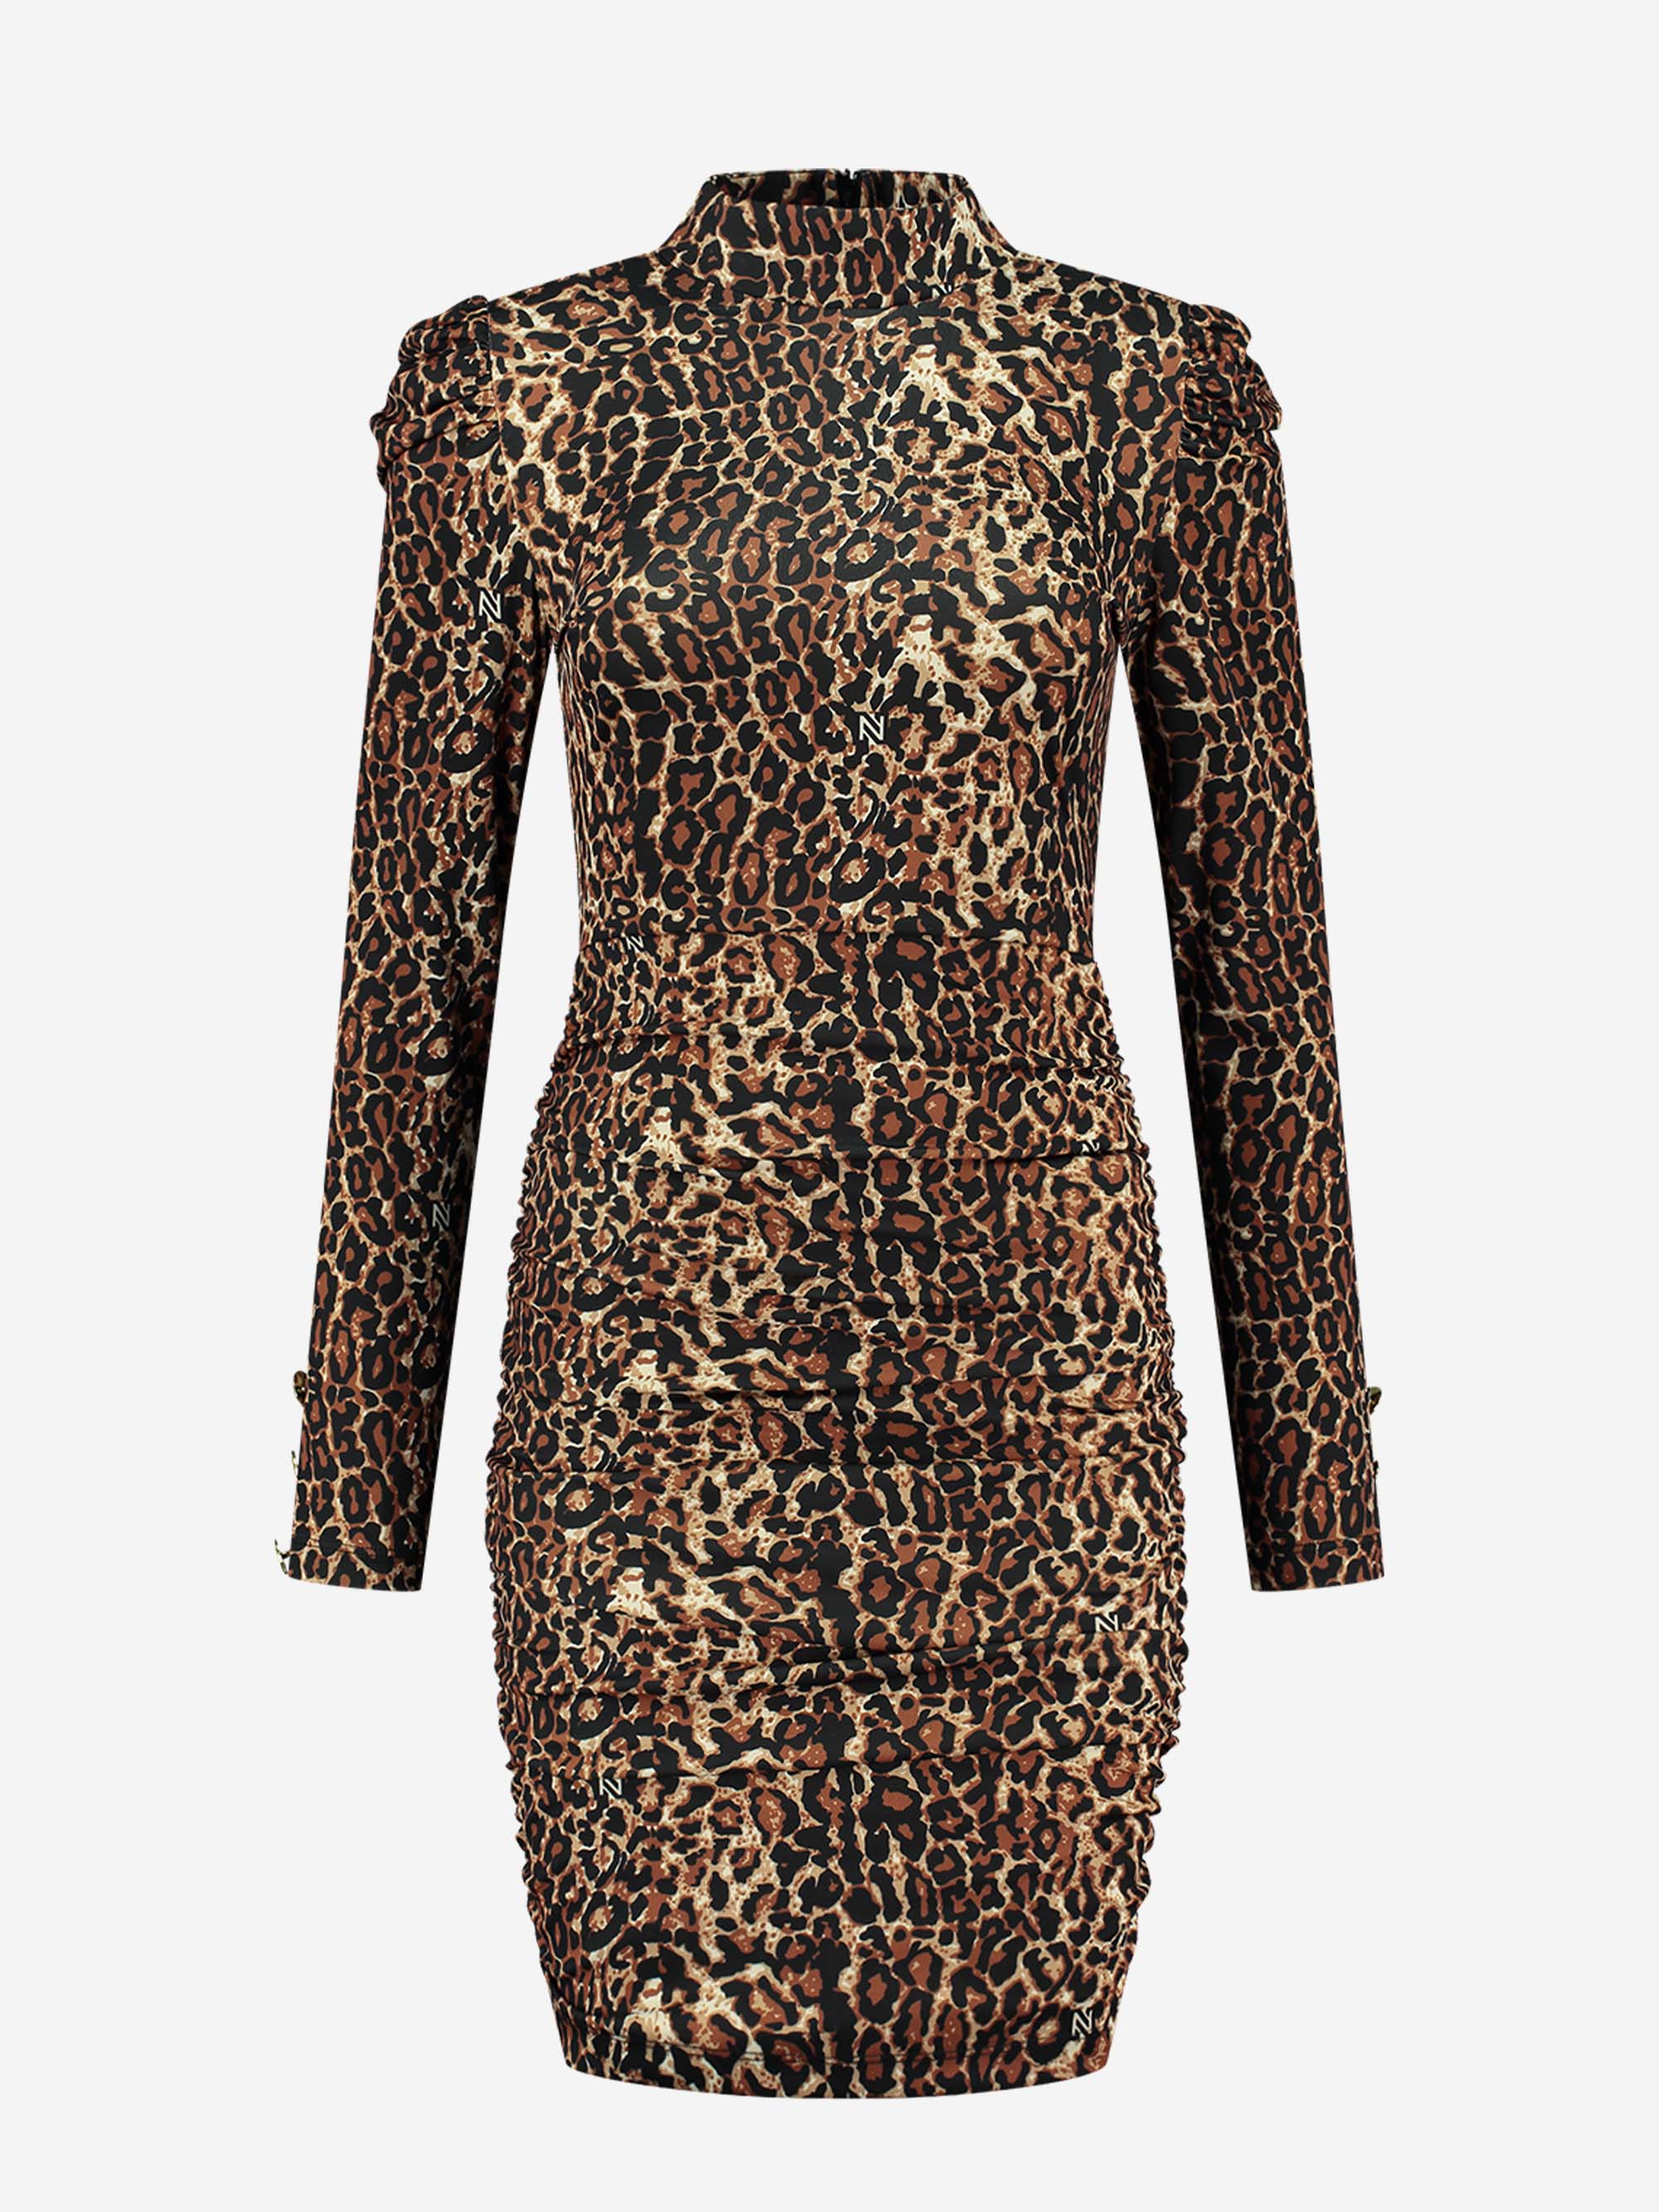 Fitted leopard print dress 